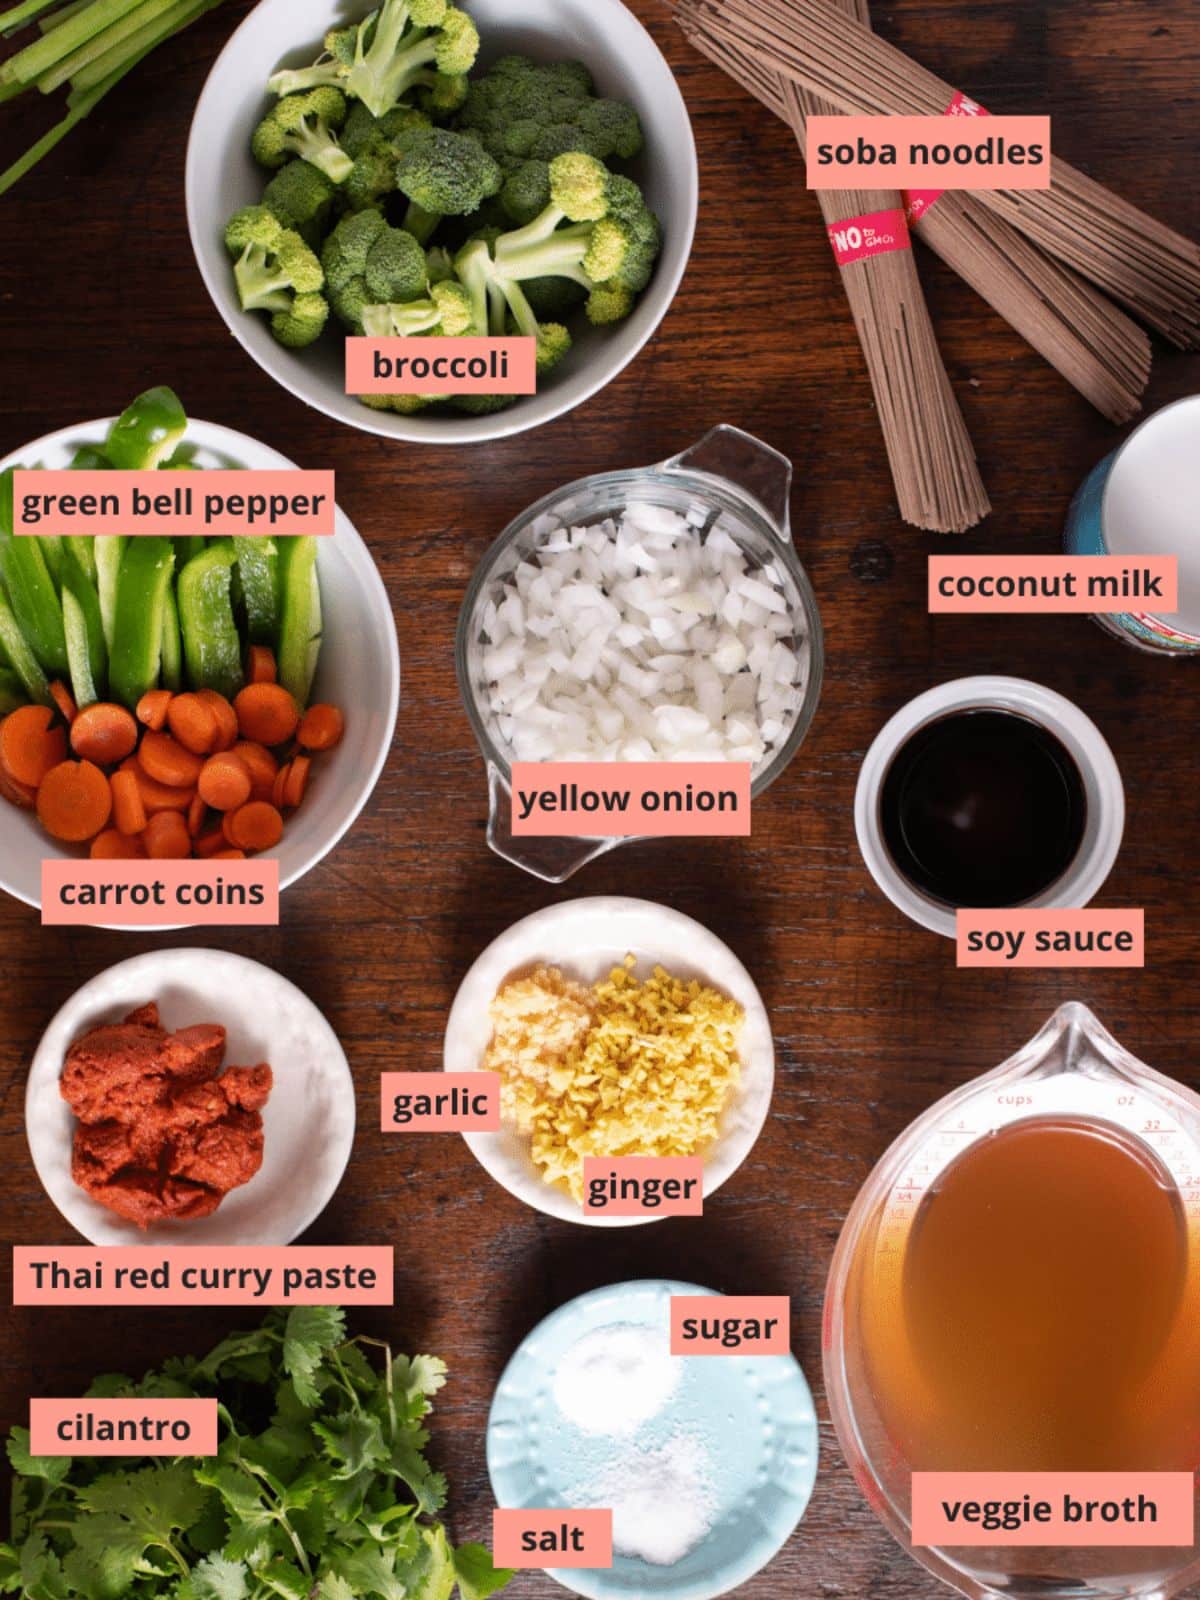 Labeled ingredients in individuals bowls on a wooden table.